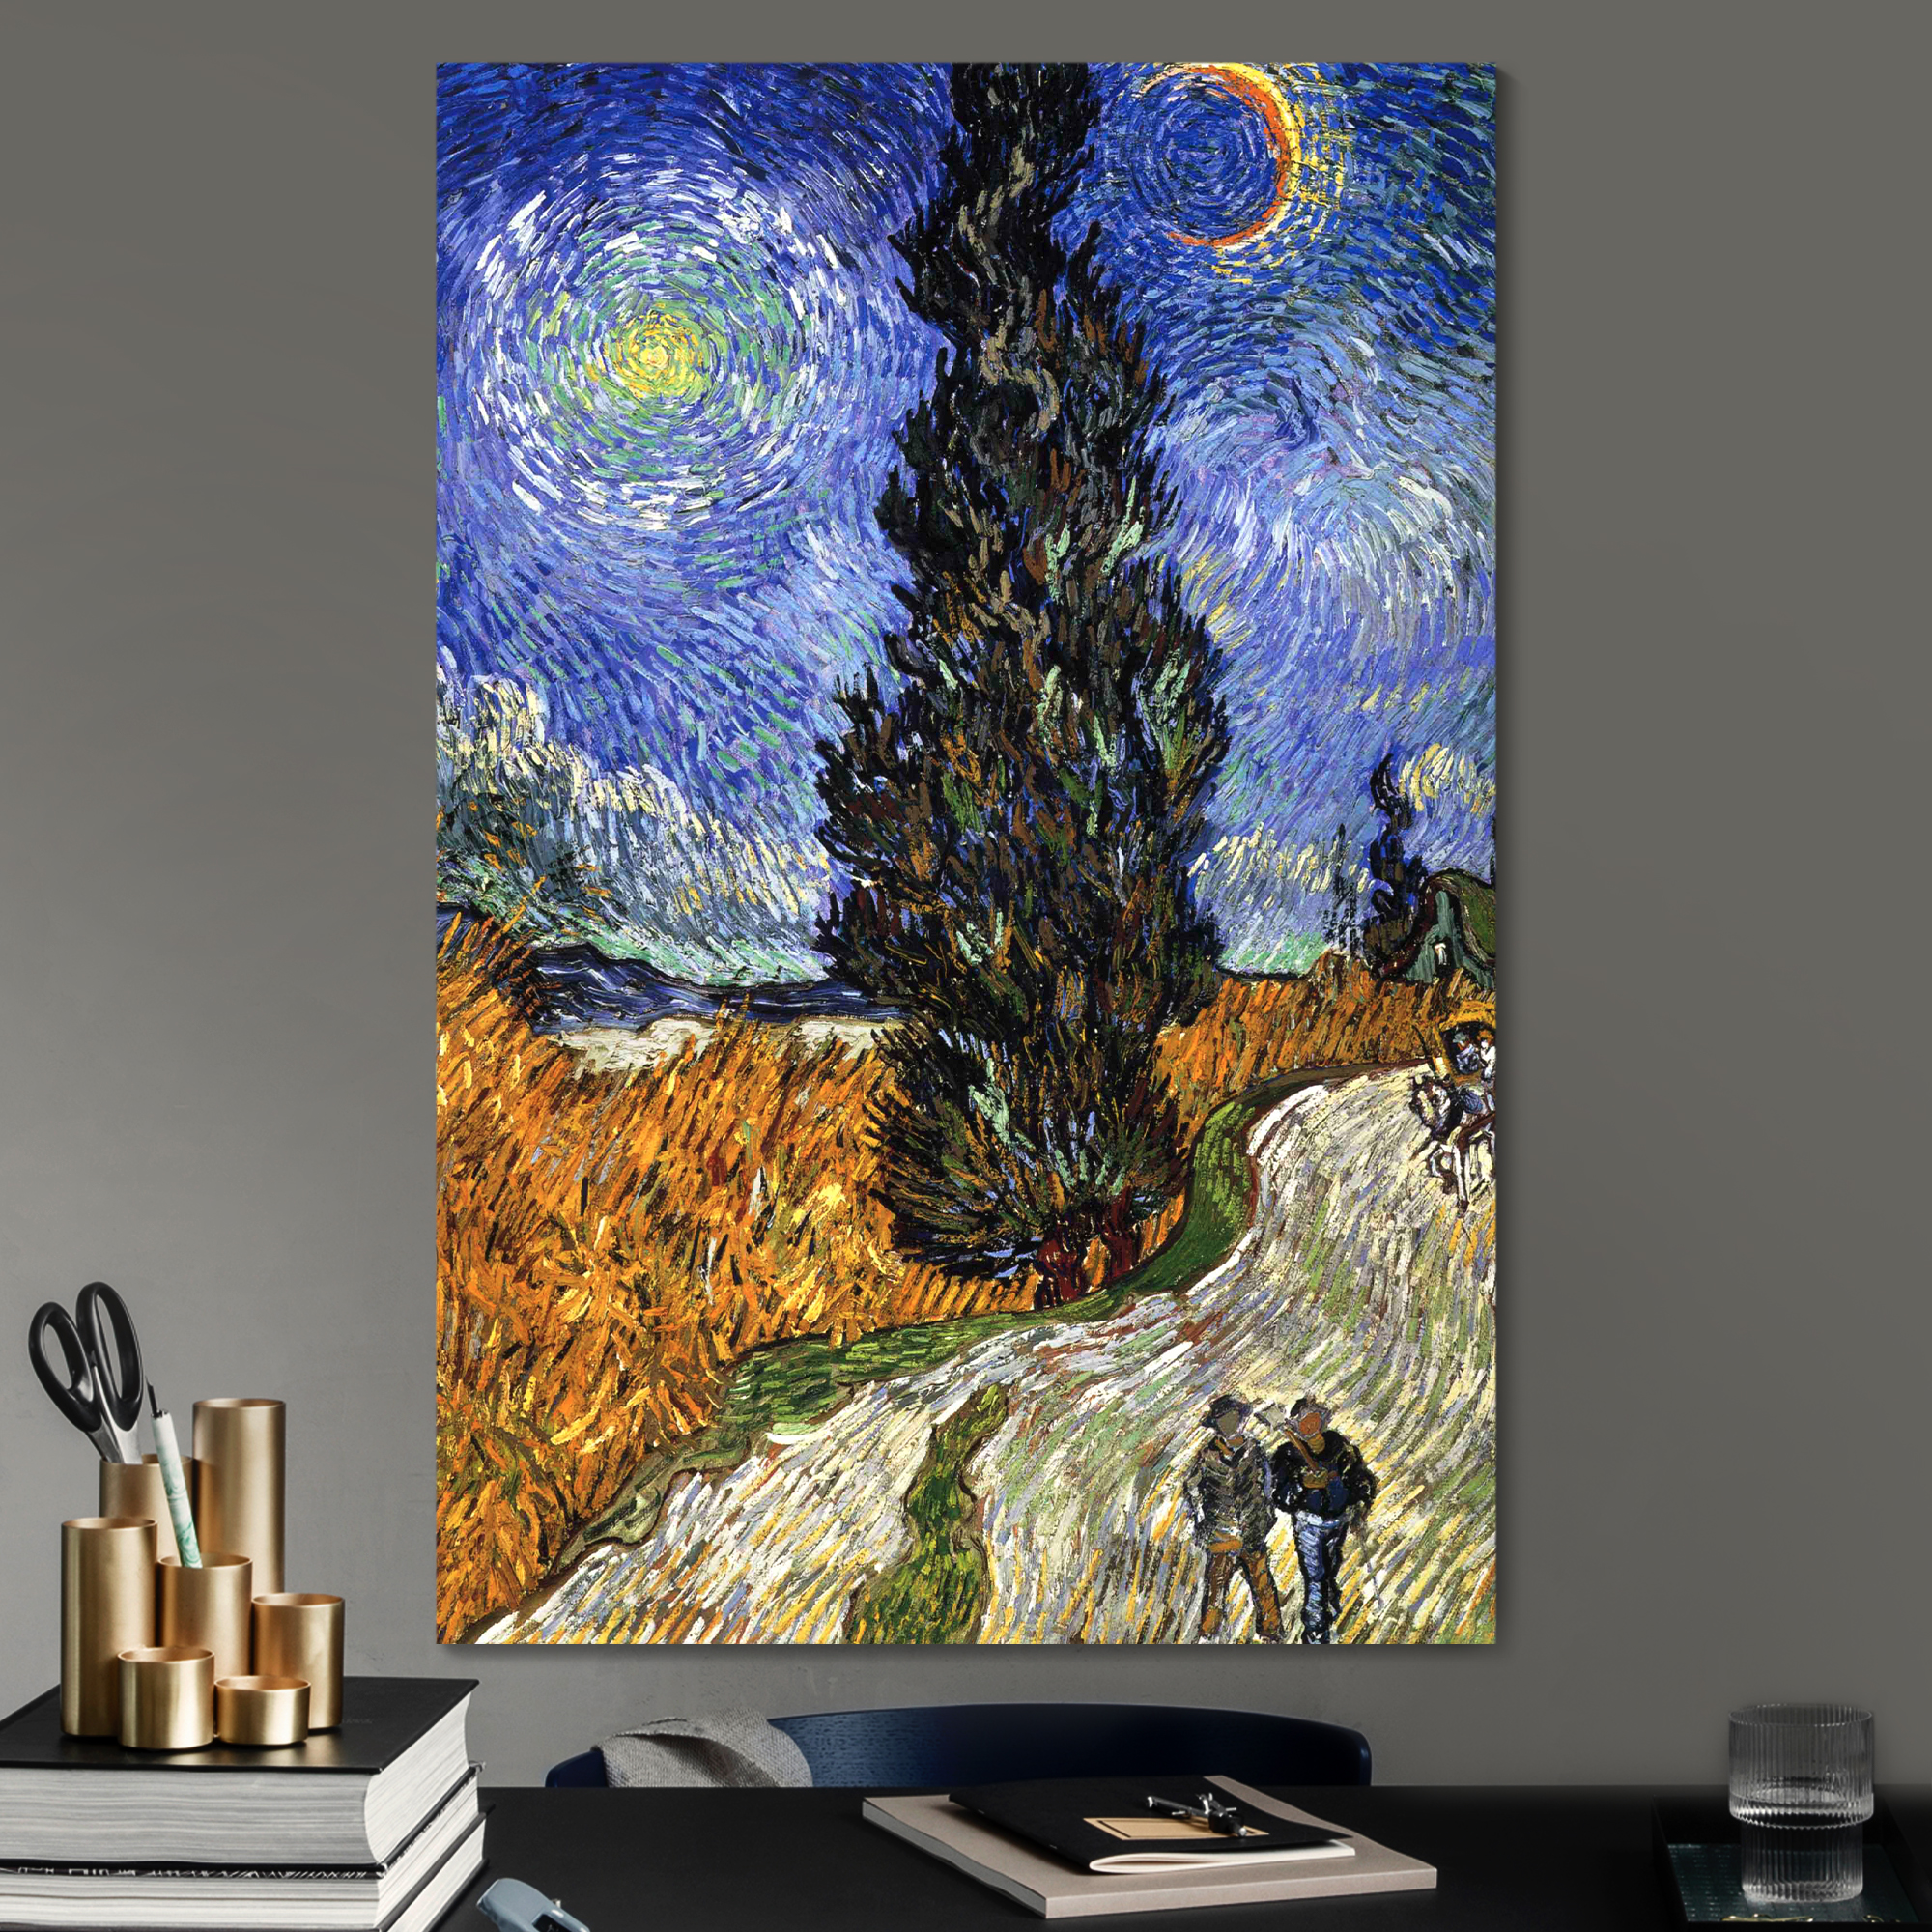 Road with Cypress and Star by Vincent Van Gogh Giclee Canvas Prints Wrapped Gallery Wall Art | Stretched and Framed Ready to Hang - 12